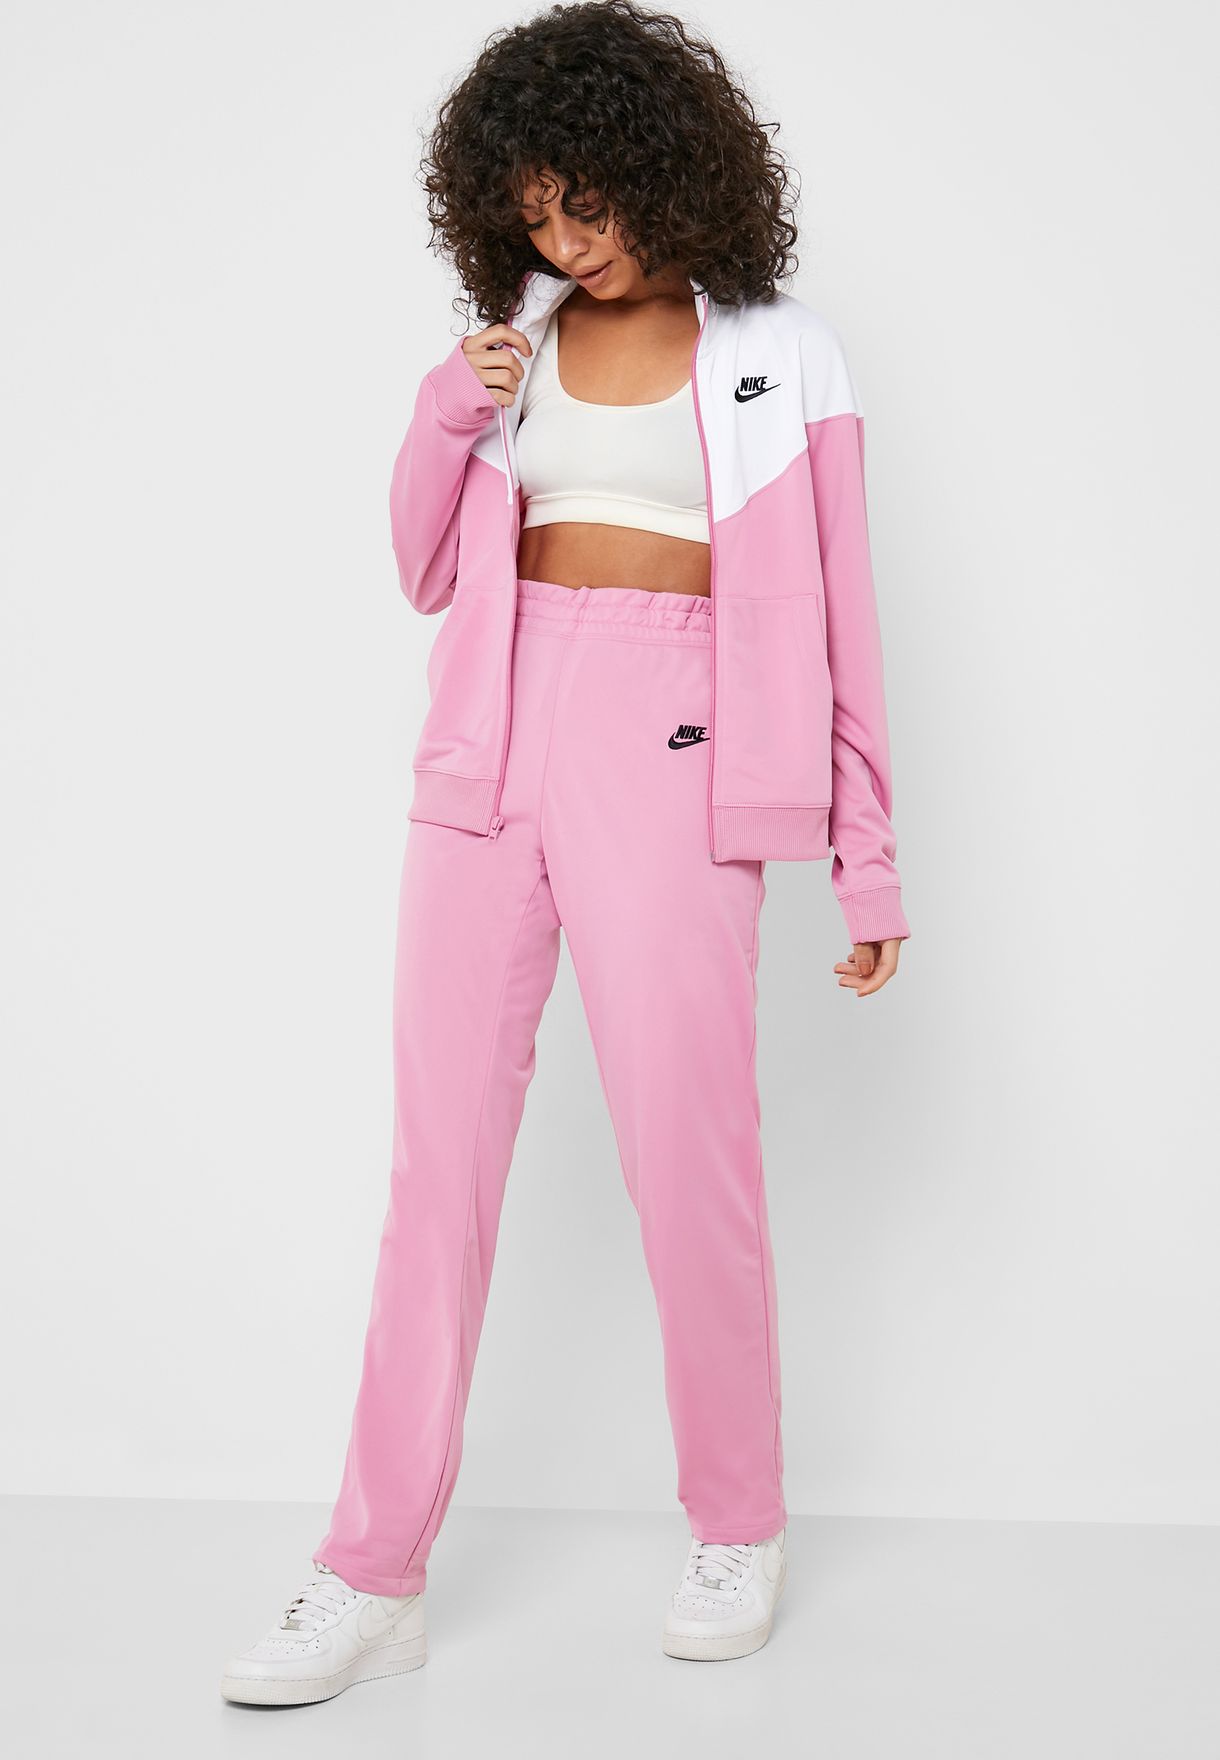 nike pink tracksuit womens